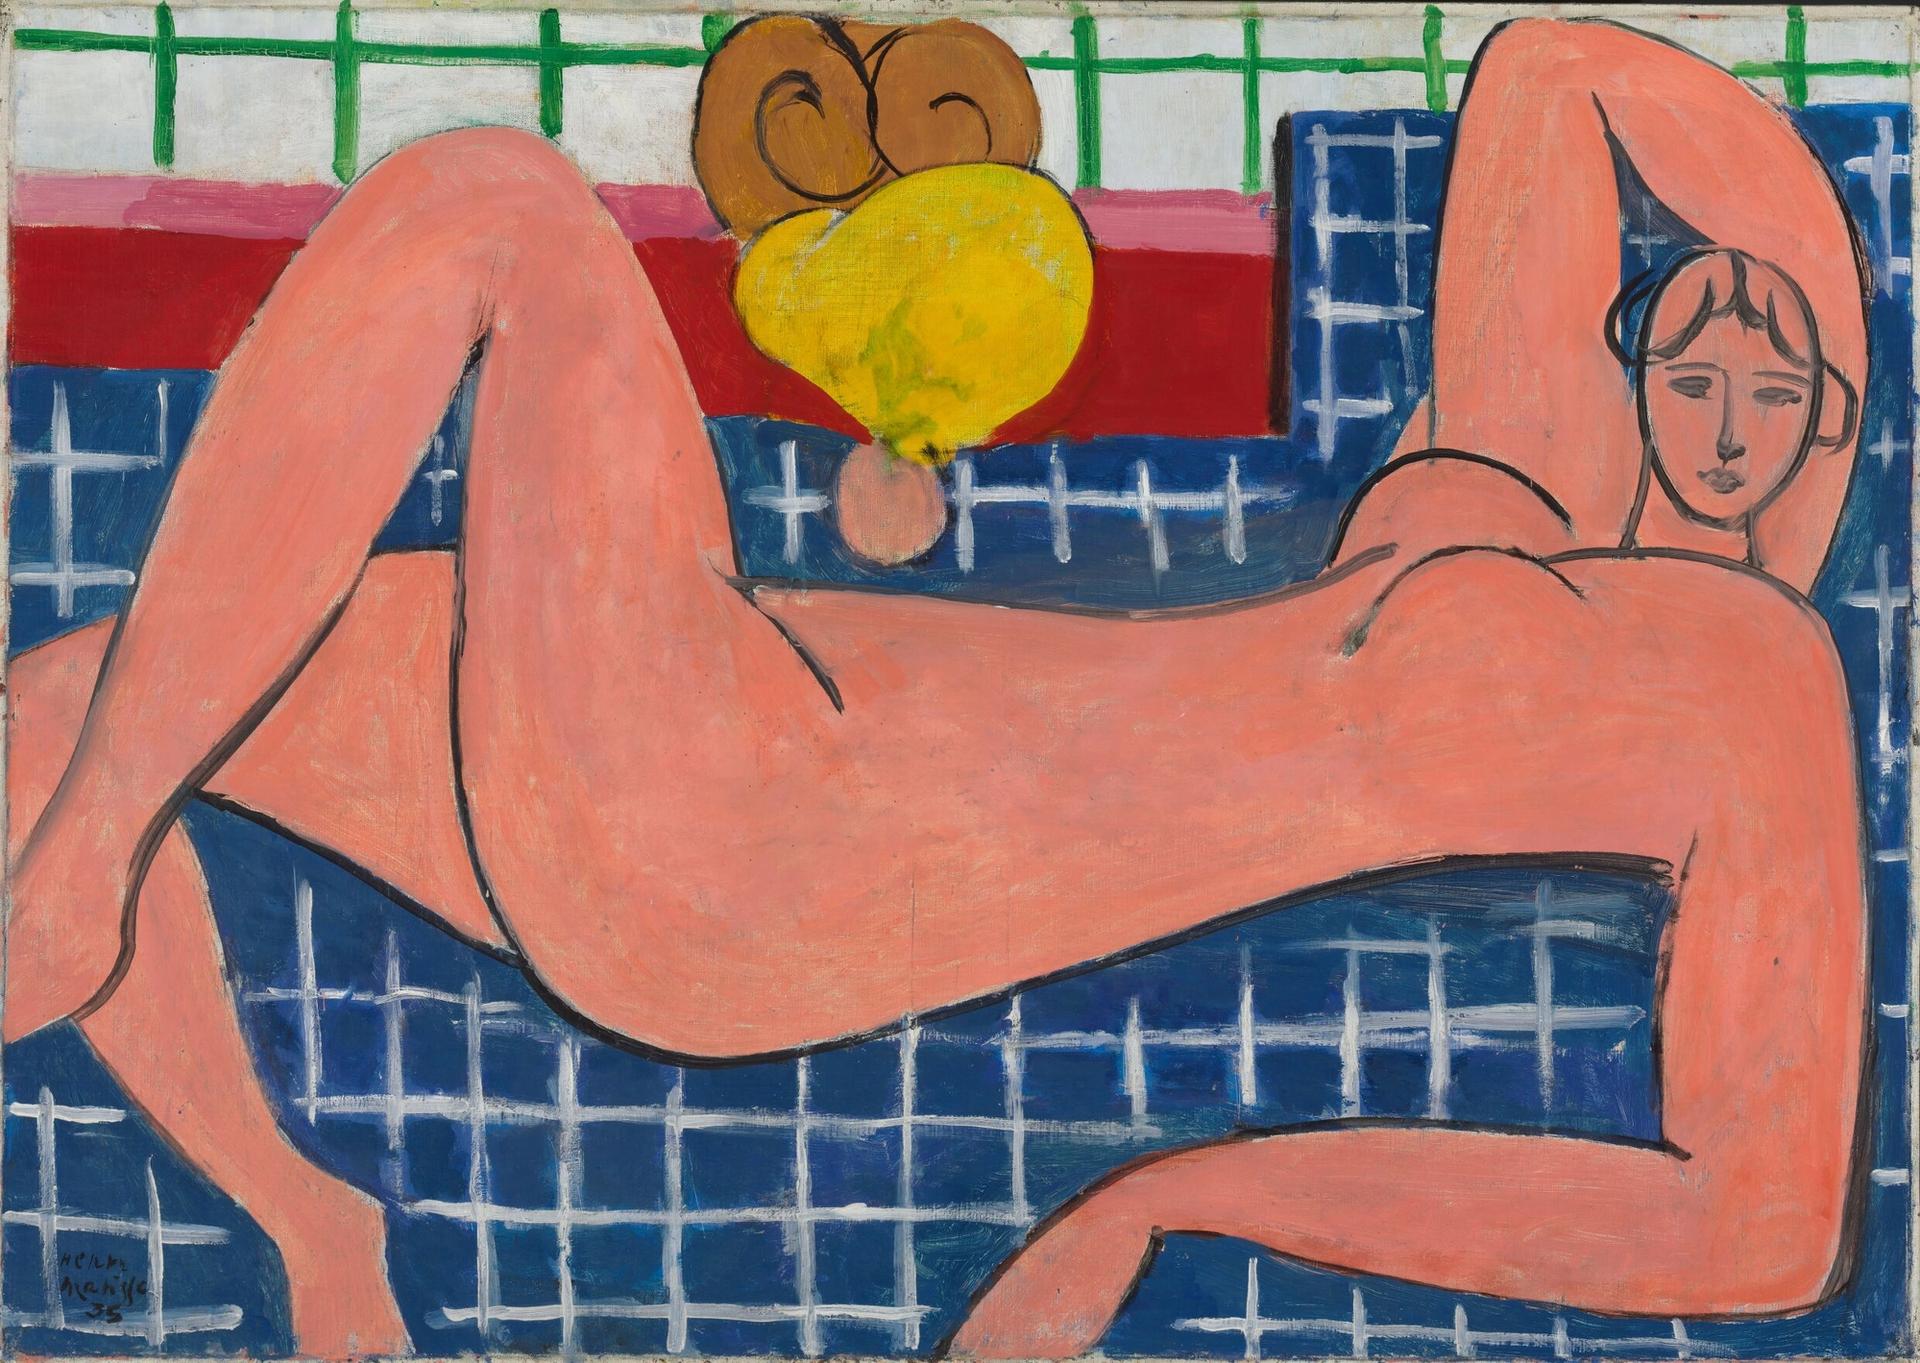 Henri Matisse's Large Reclining Nude (1935) © Succession H. Matisse/Artists Rights Society (ARS), New York